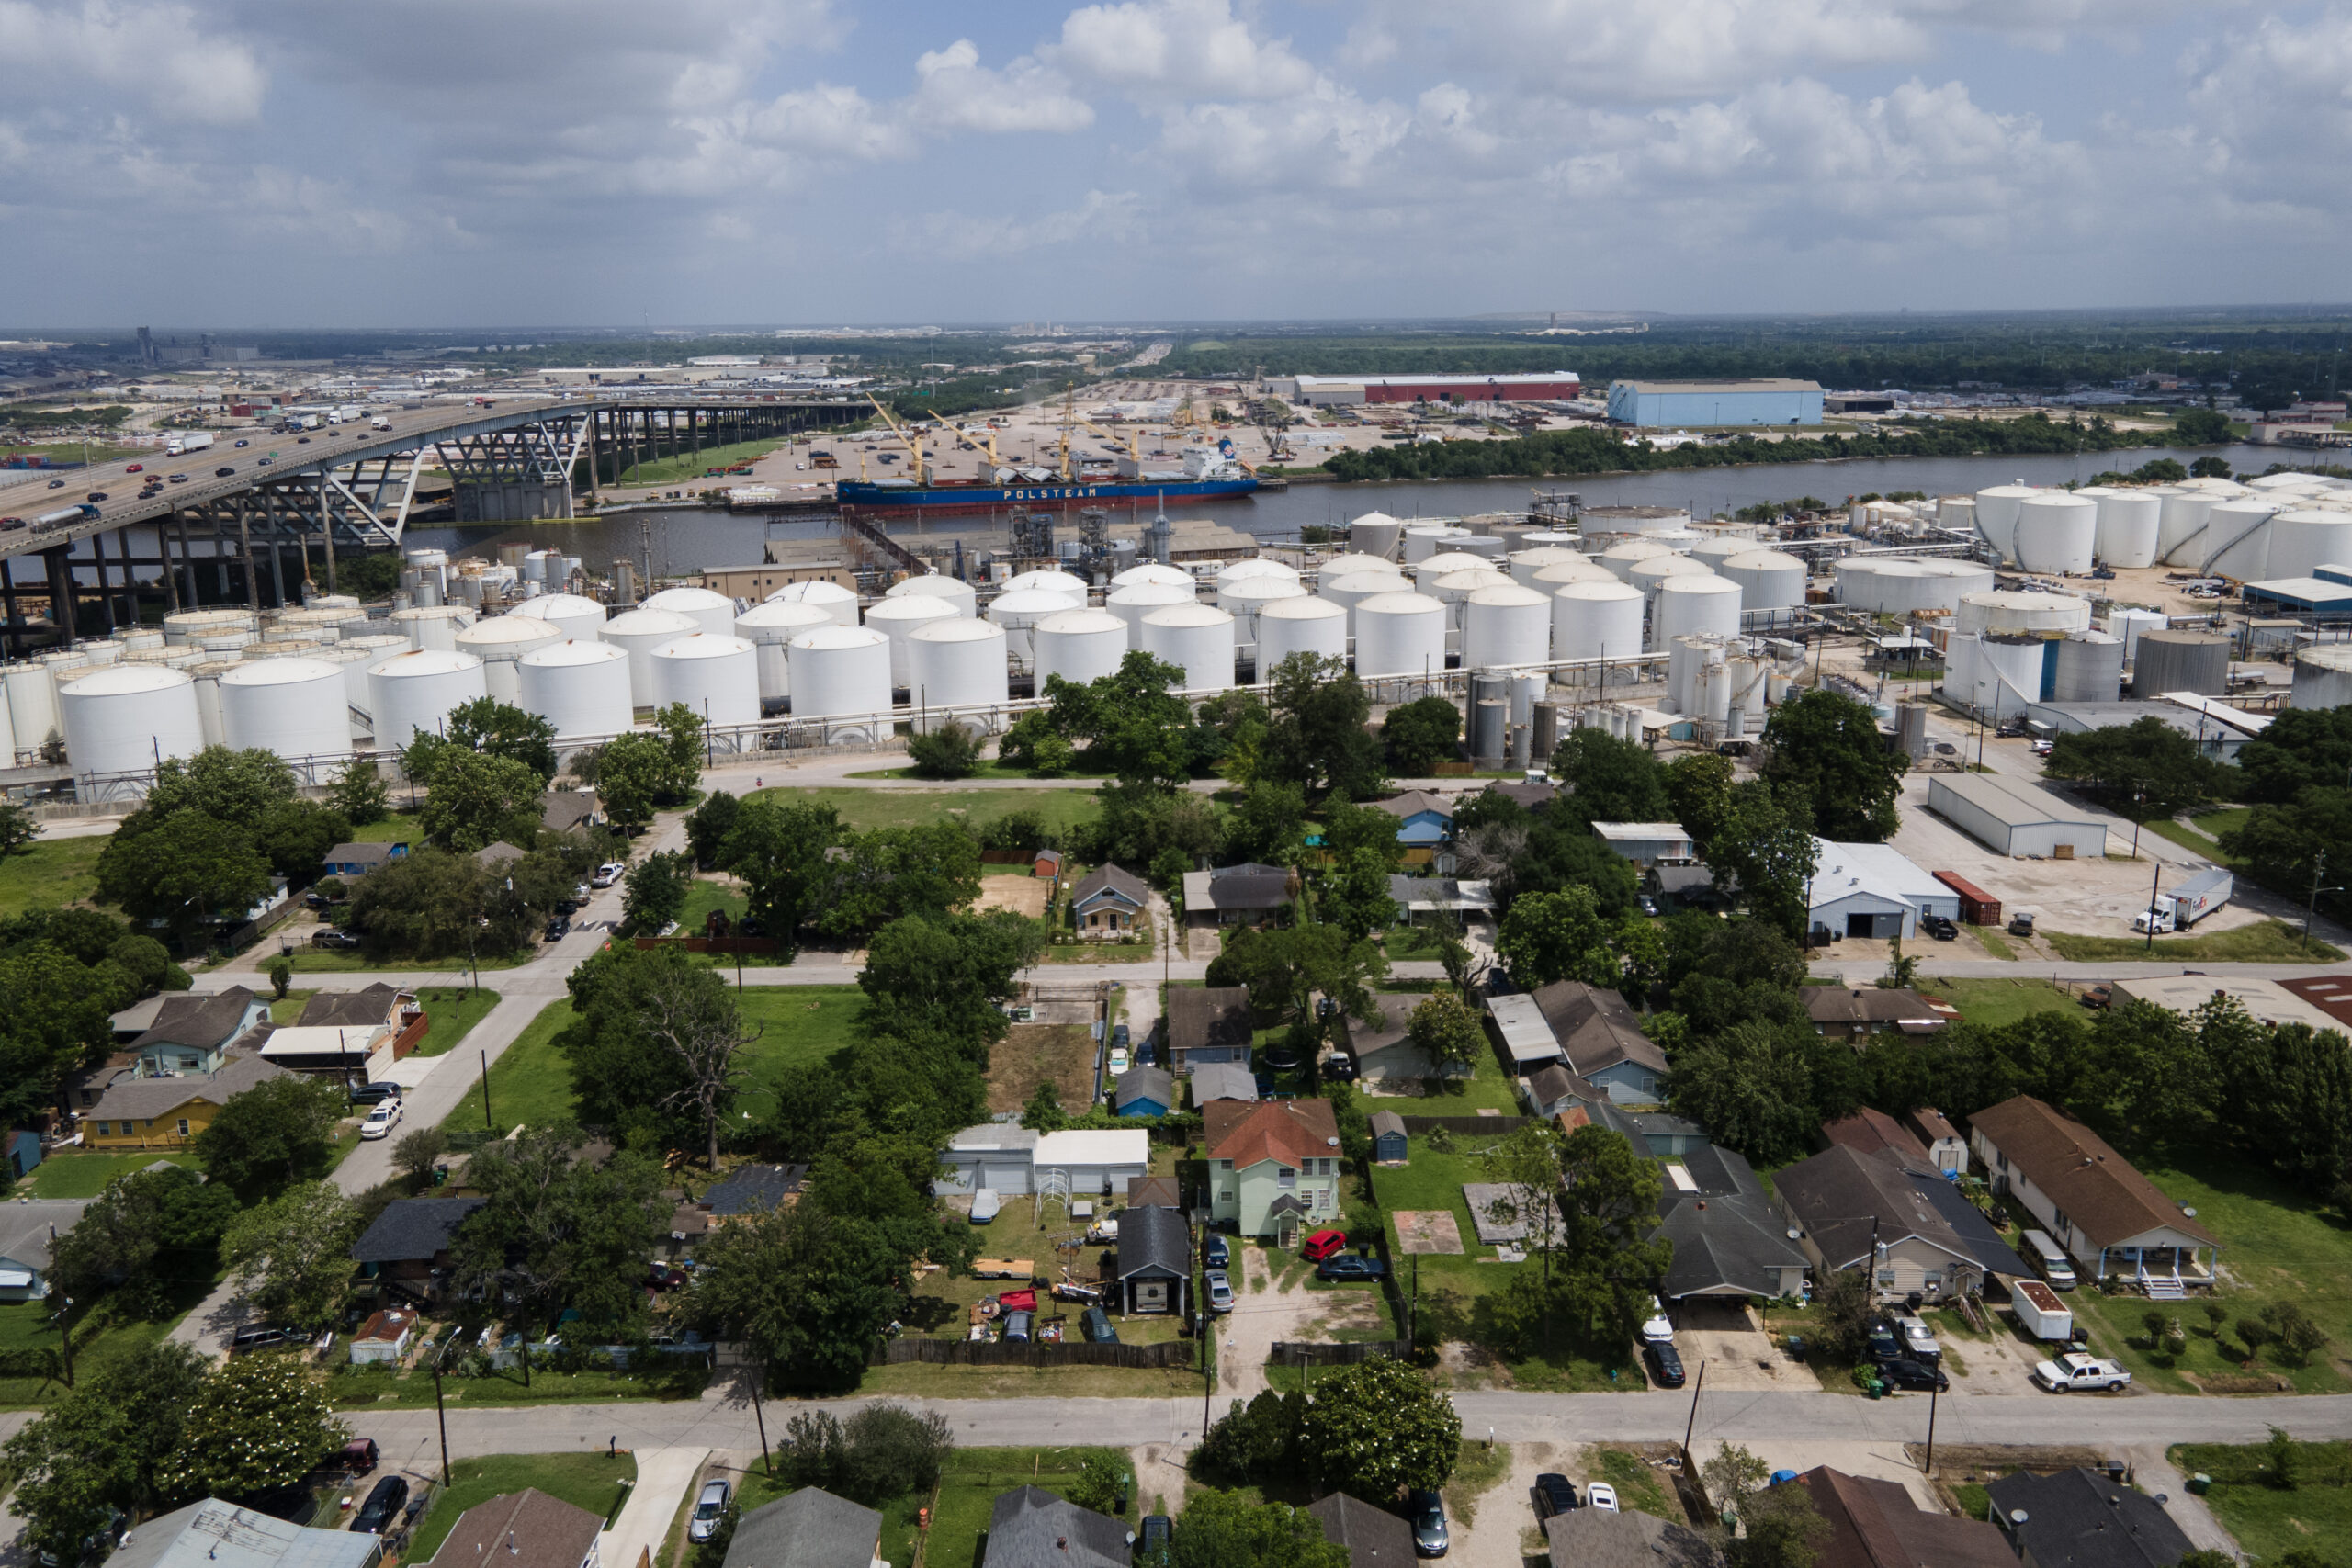 A drone image showing the Valero refinery, a series of white indutstrial tanks in clusters up against a residential neighborhood and a waterway which passes through Houston.